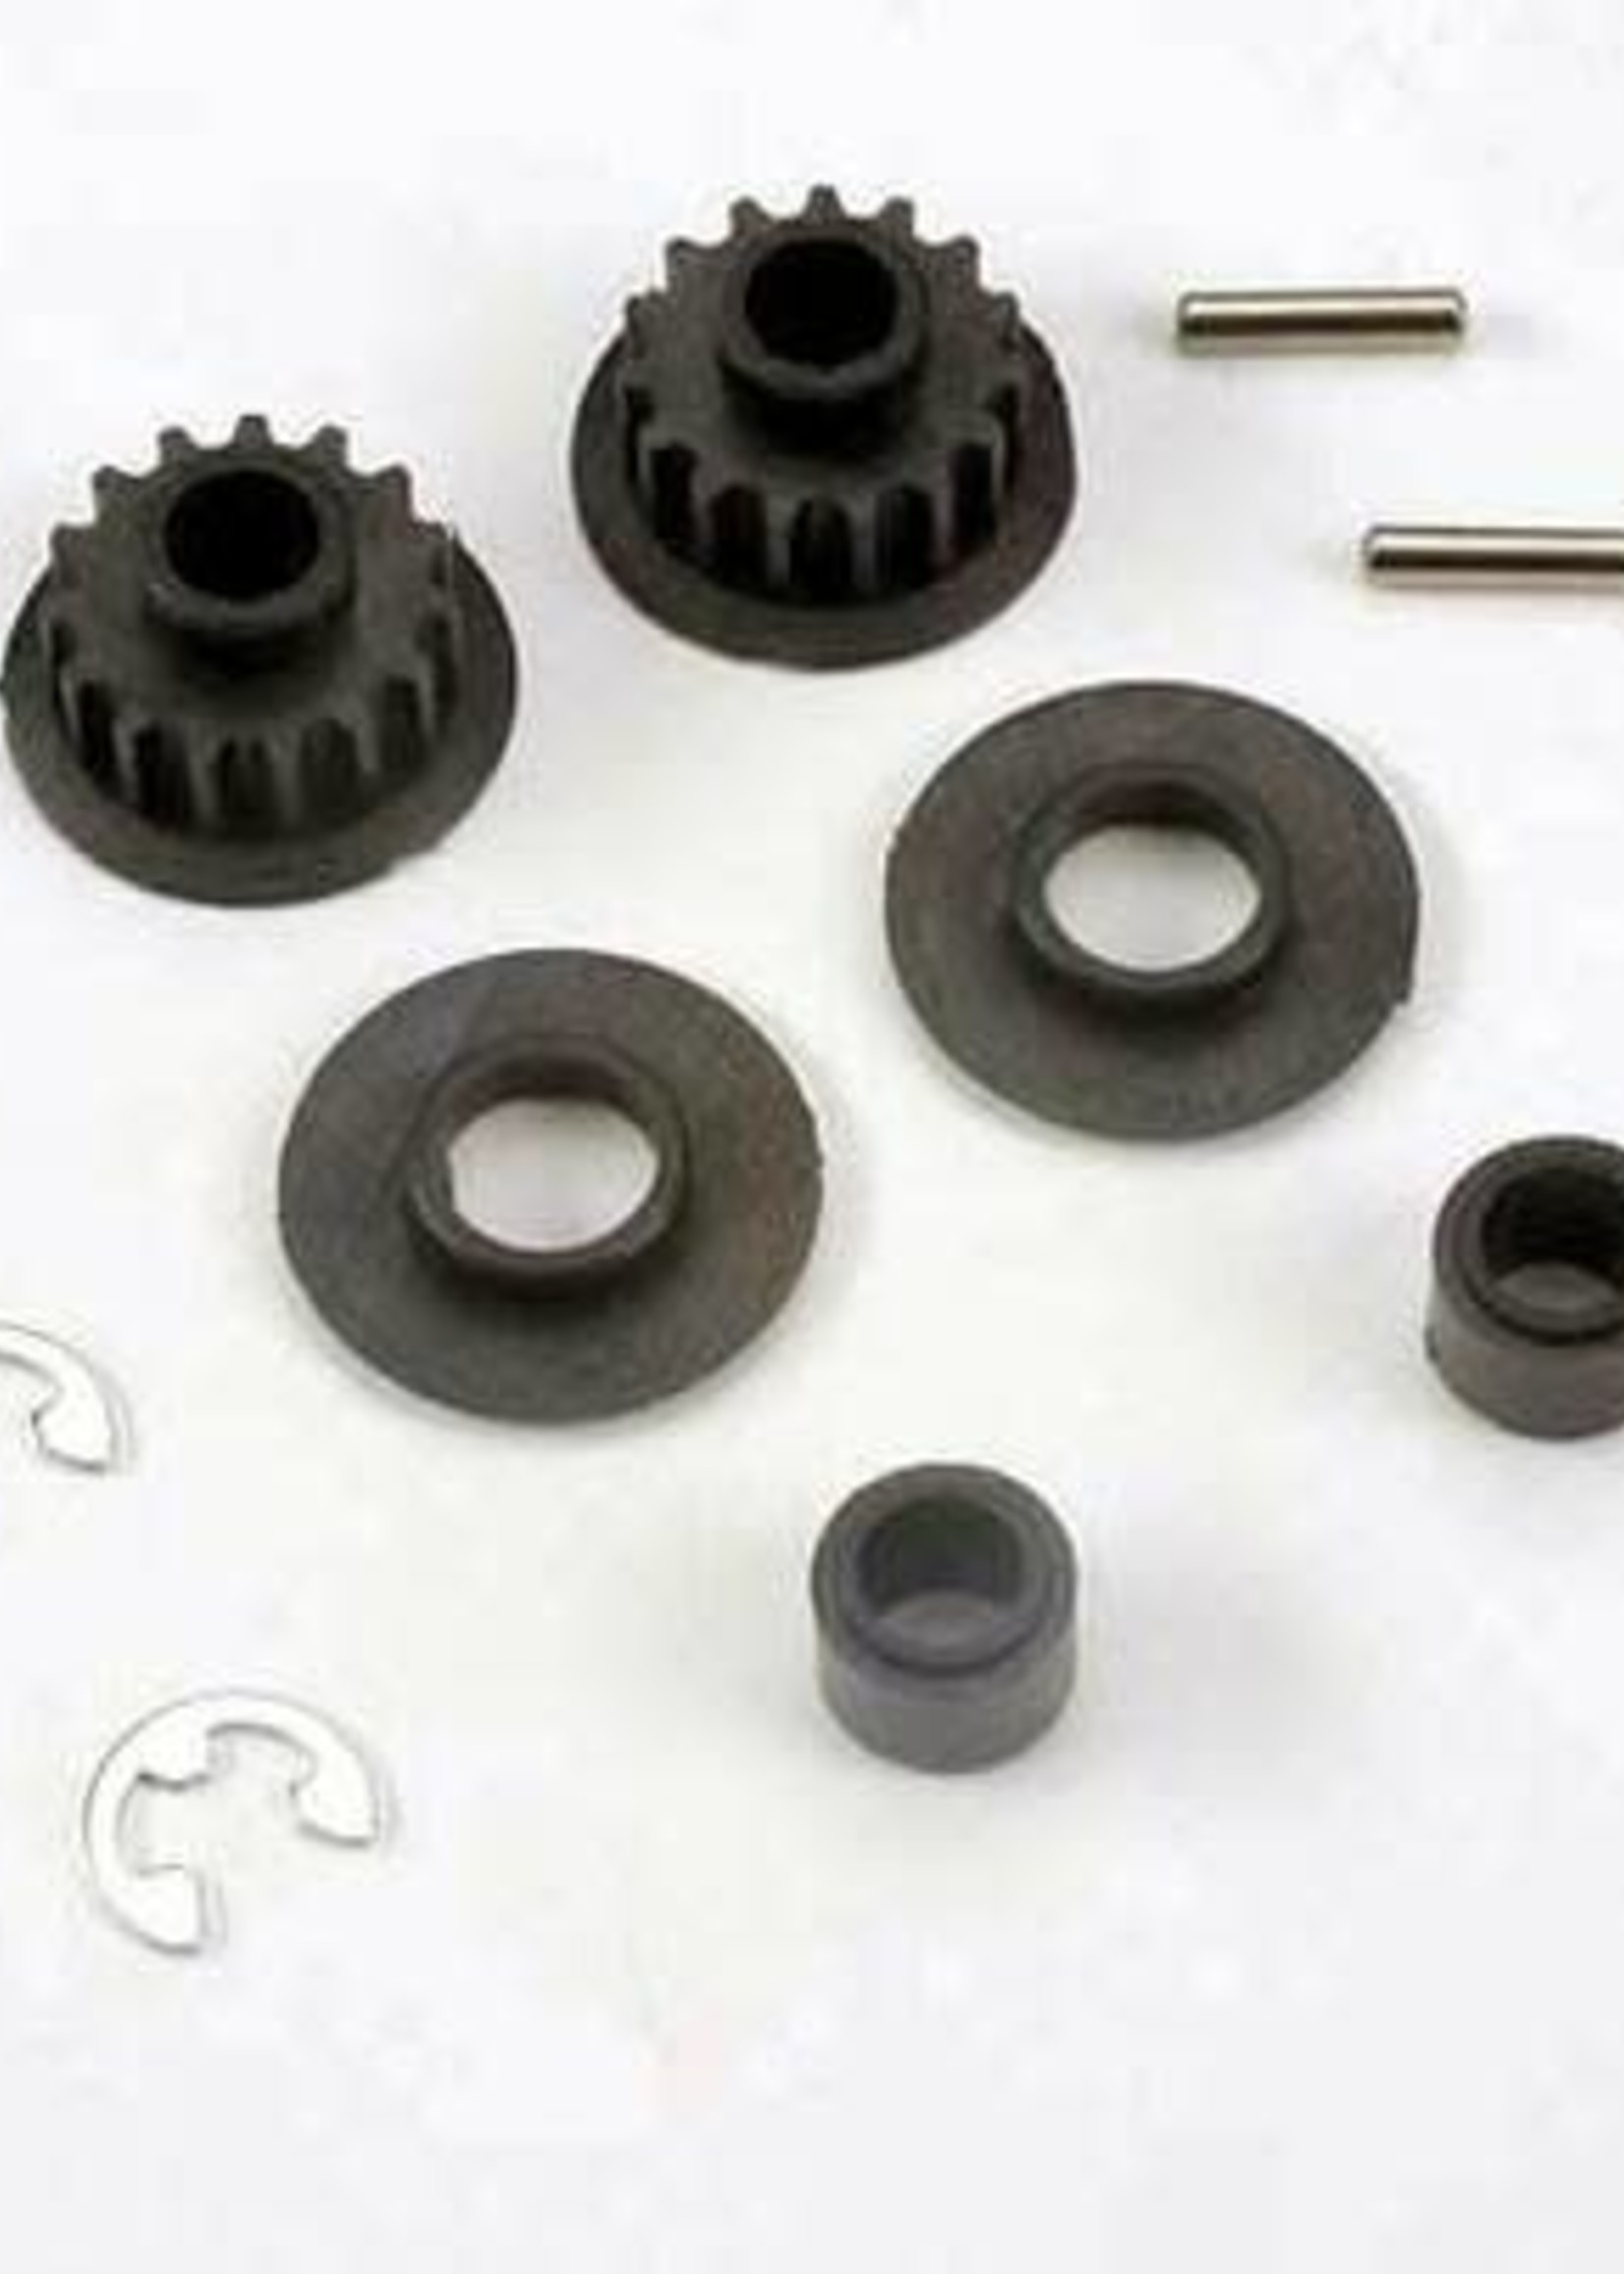 TRAXXAS 4395 Pulley 15 Groove 4-Tec